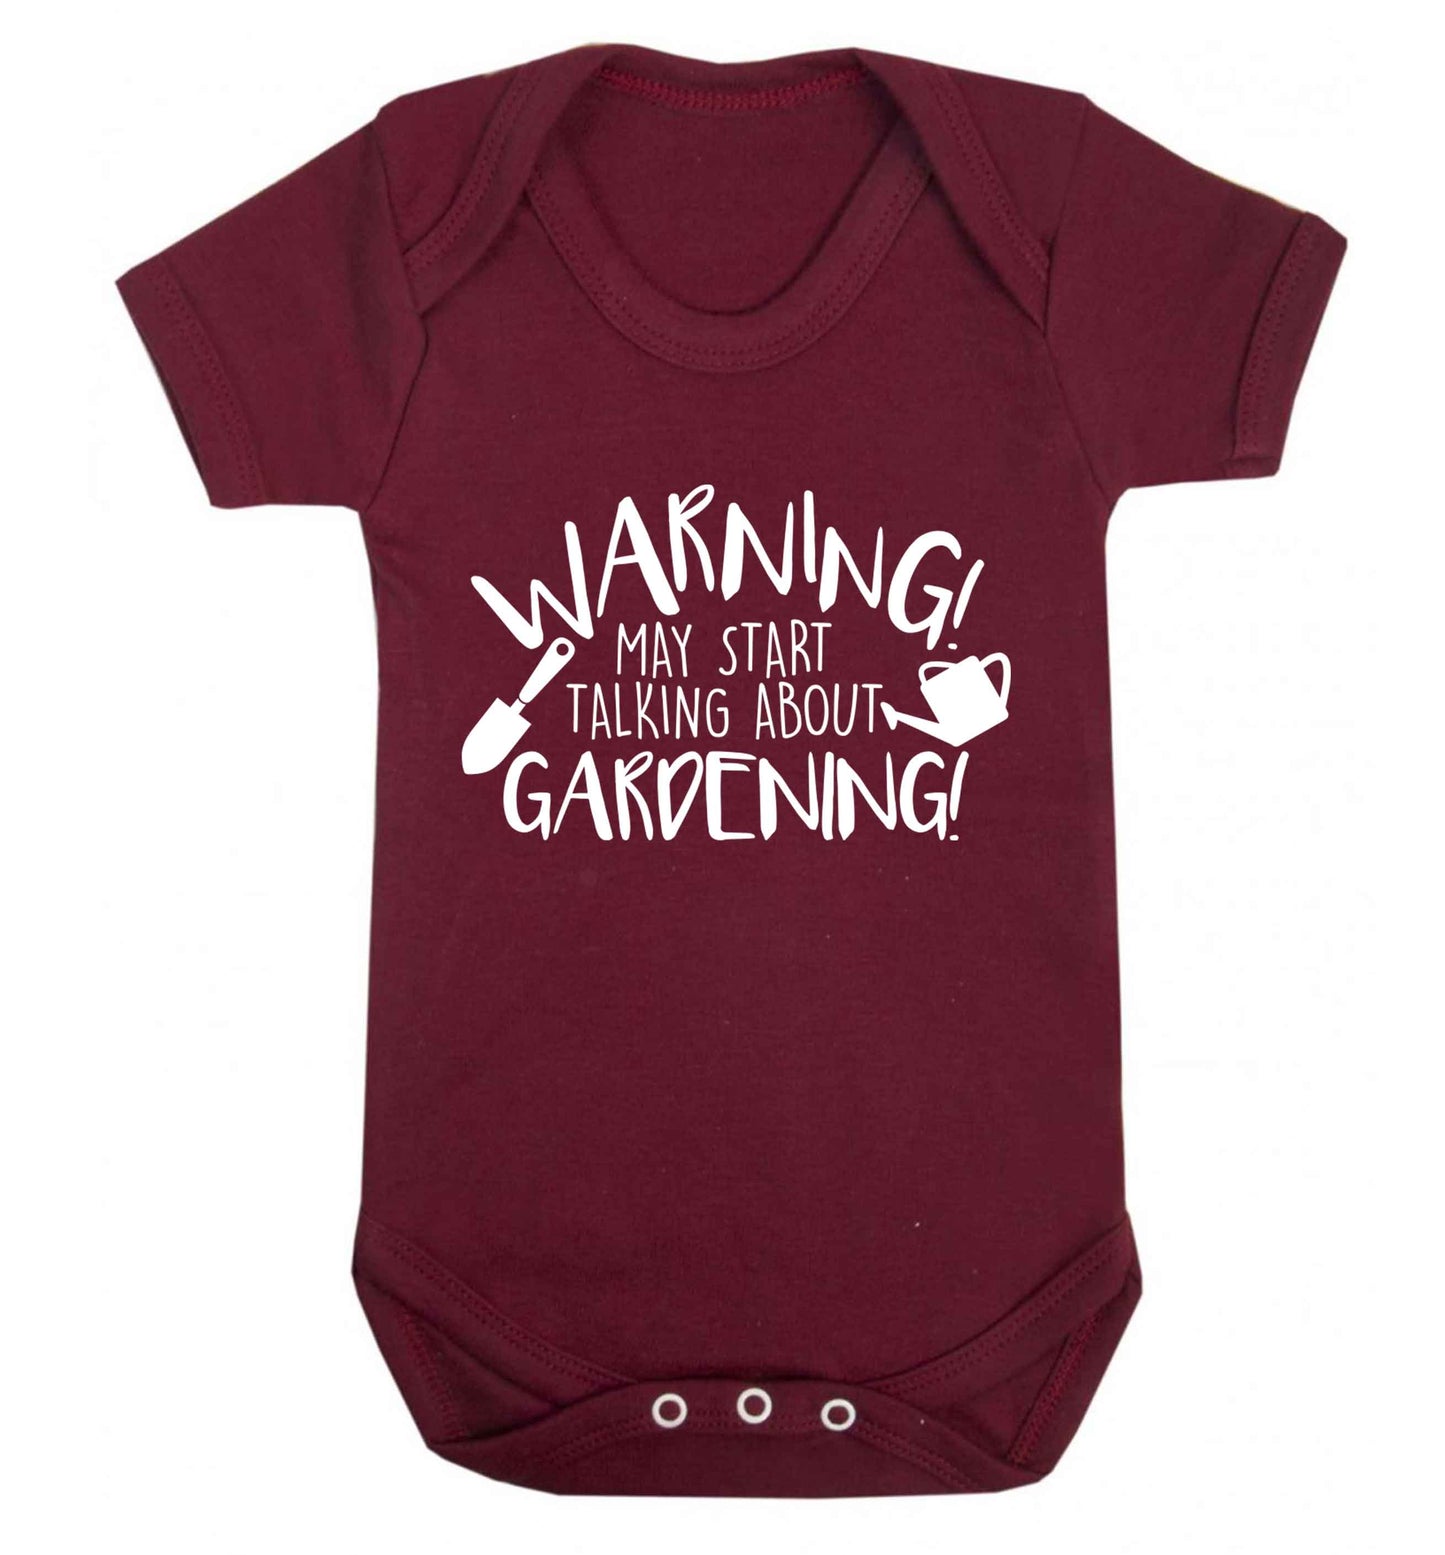 Warning may start talking about gardening Baby Vest maroon 18-24 months